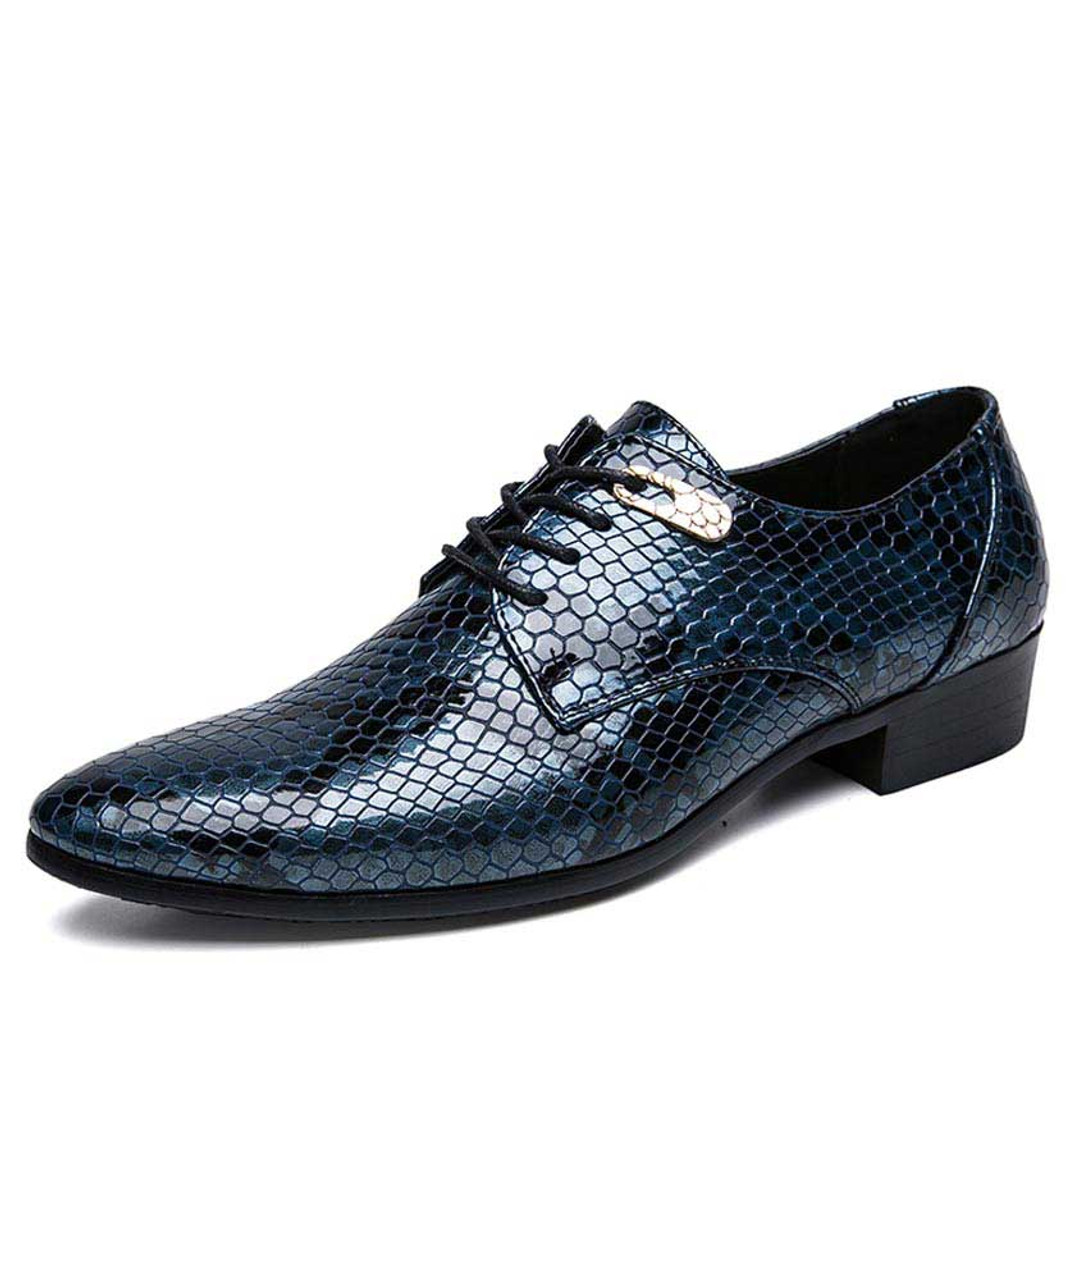 snakeskin casual shoes